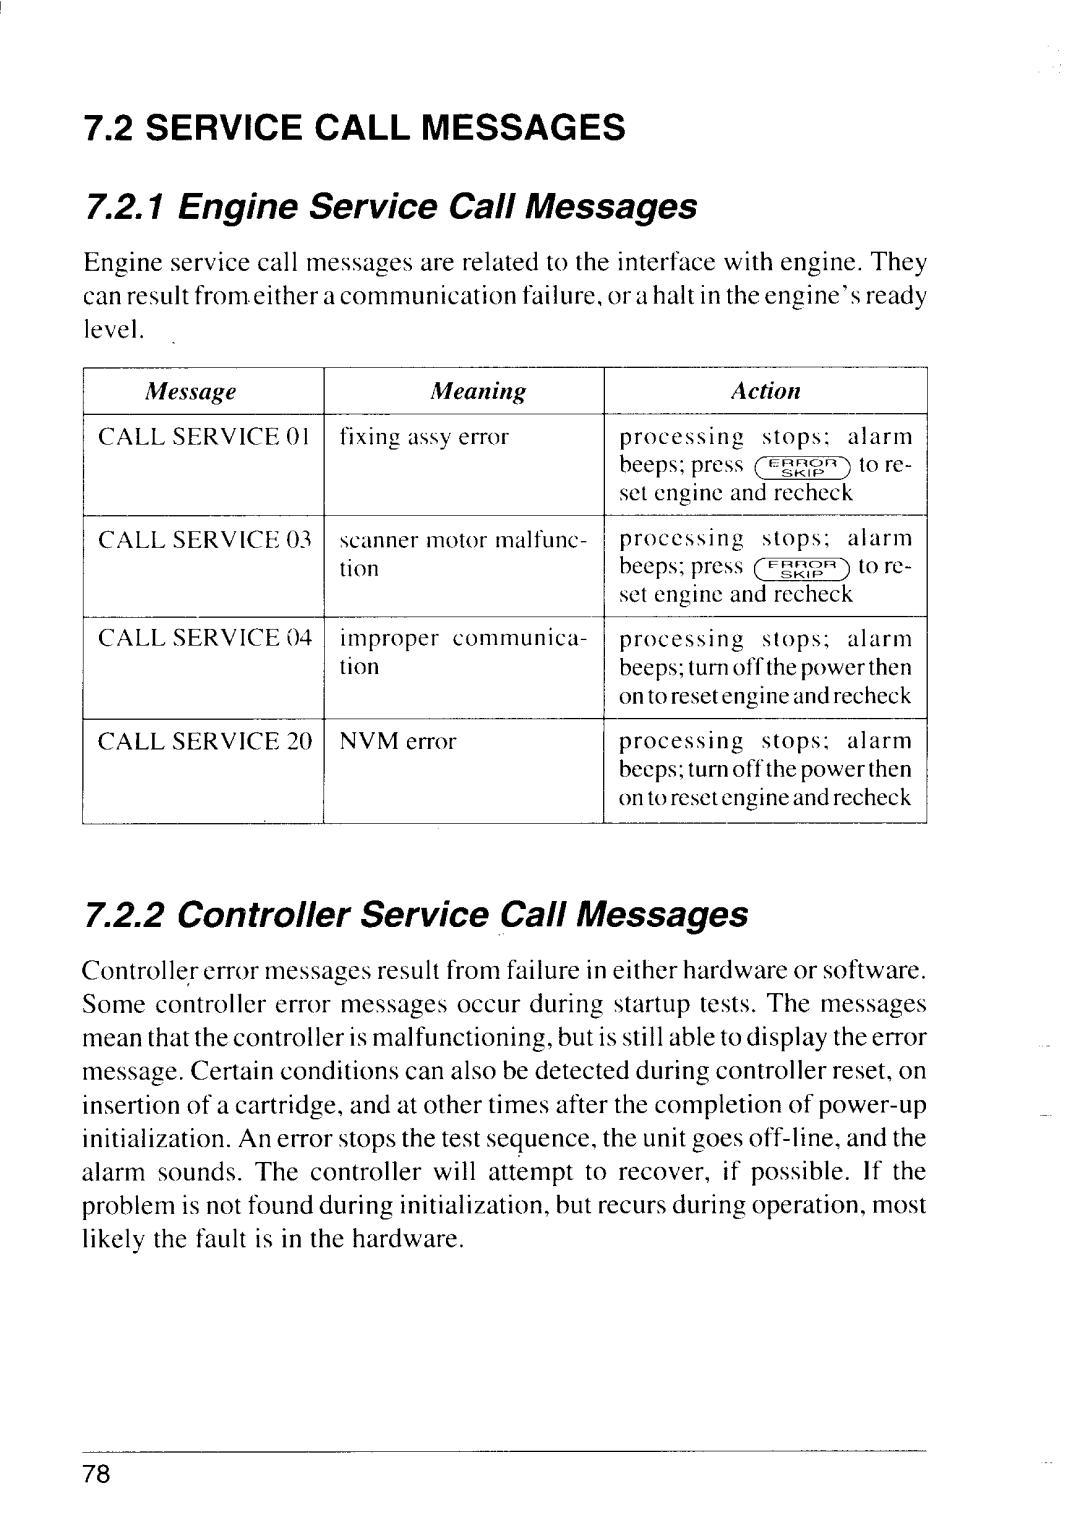 Star Micronics LS-5 EX, LS-5 TT operation manual Engine Service Call Messages, Controller Service Call Messages 